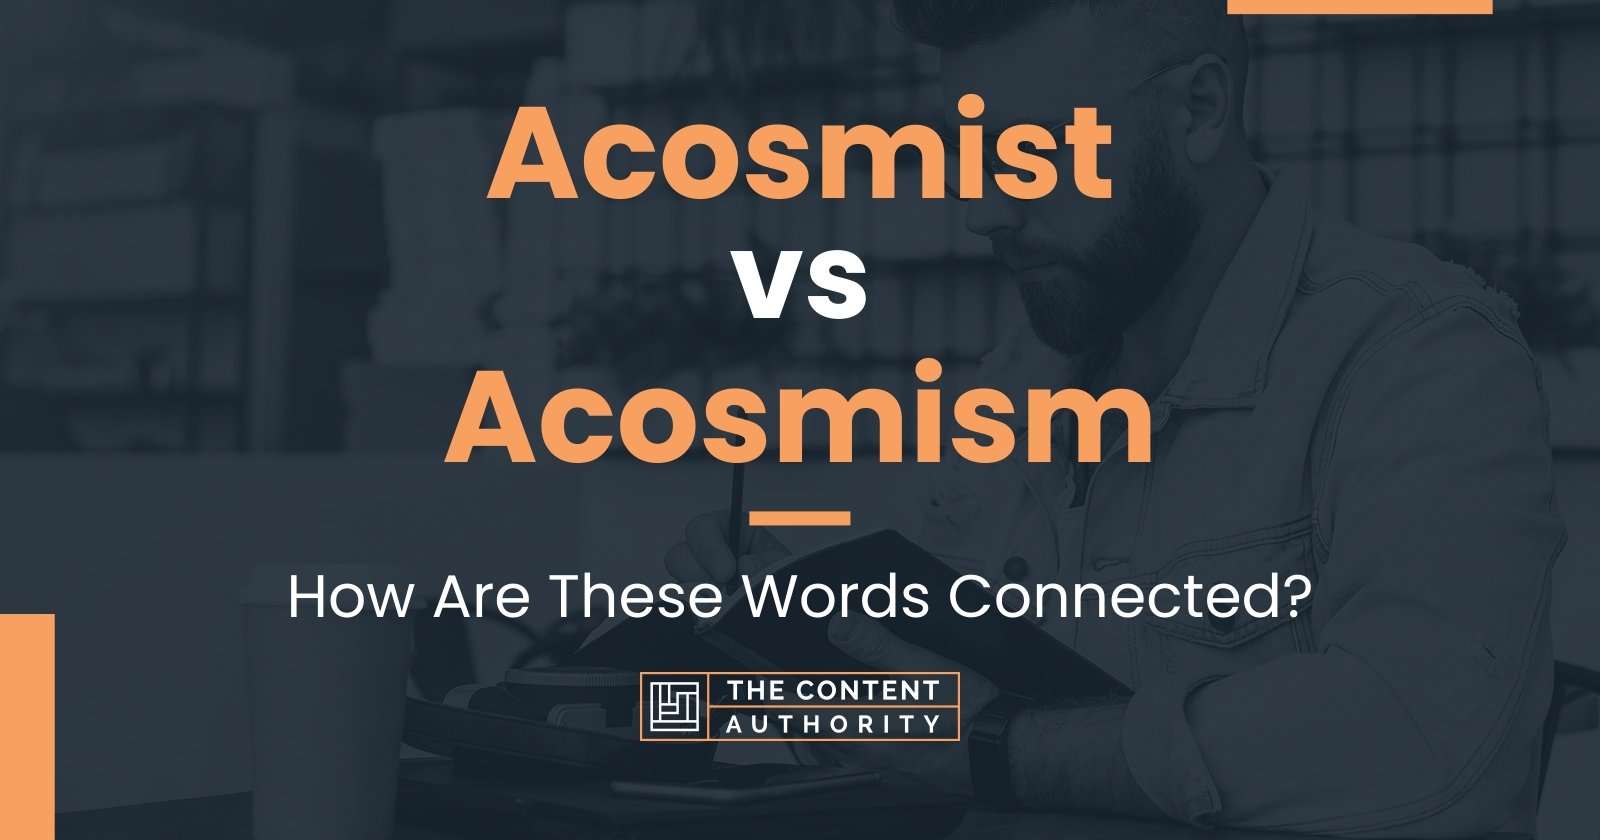 Acosmist vs Acosmism: How Are These Words Connected?